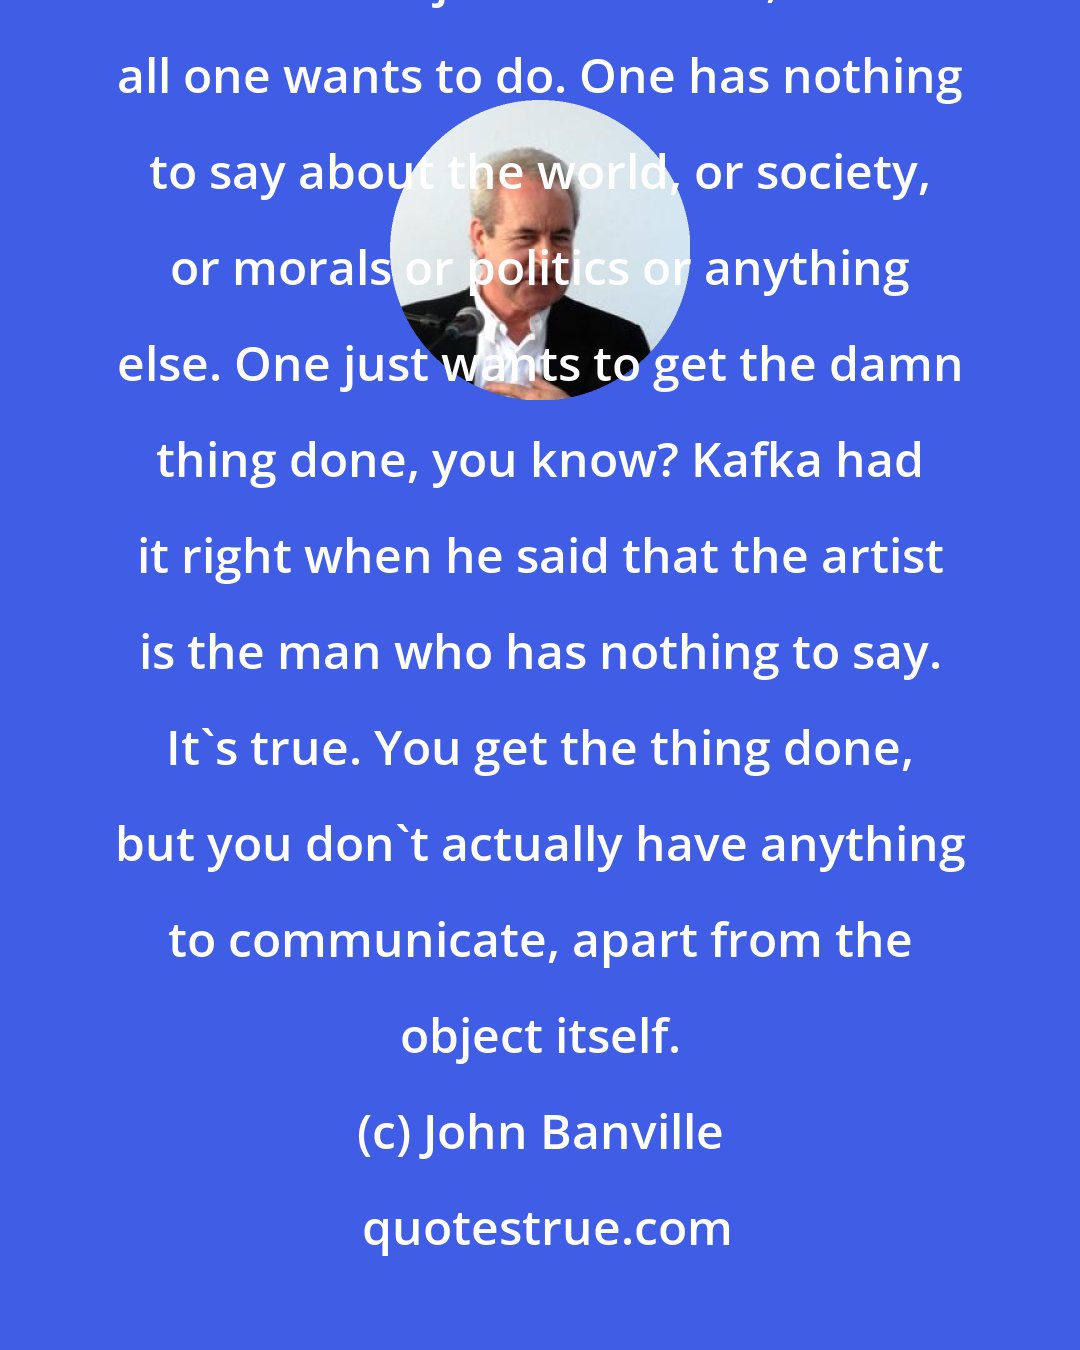 John Banville: All one wants to do is make a small, finished, polished, burnished, beautiful object . . . I mean, that's all one wants to do. One has nothing to say about the world, or society, or morals or politics or anything else. One just wants to get the damn thing done, you know? Kafka had it right when he said that the artist is the man who has nothing to say. It's true. You get the thing done, but you don't actually have anything to communicate, apart from the object itself.